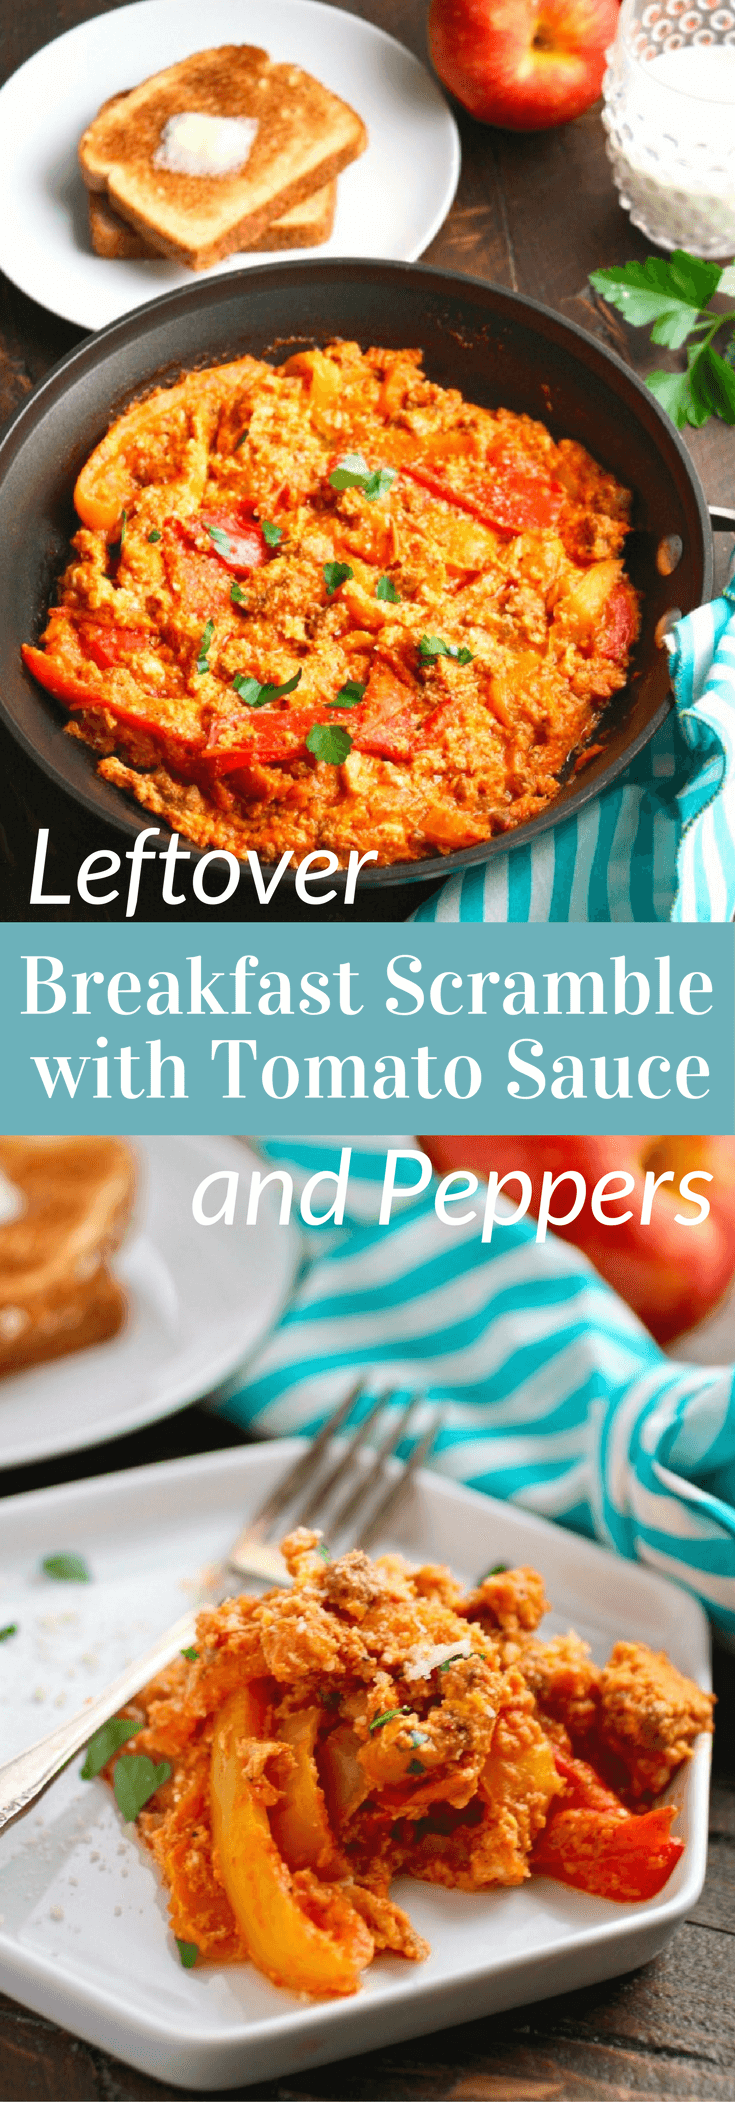 Use your leftover to make your next meal: Try Leftover Breakfast Scramble with Tomato Sauce and Peppers!